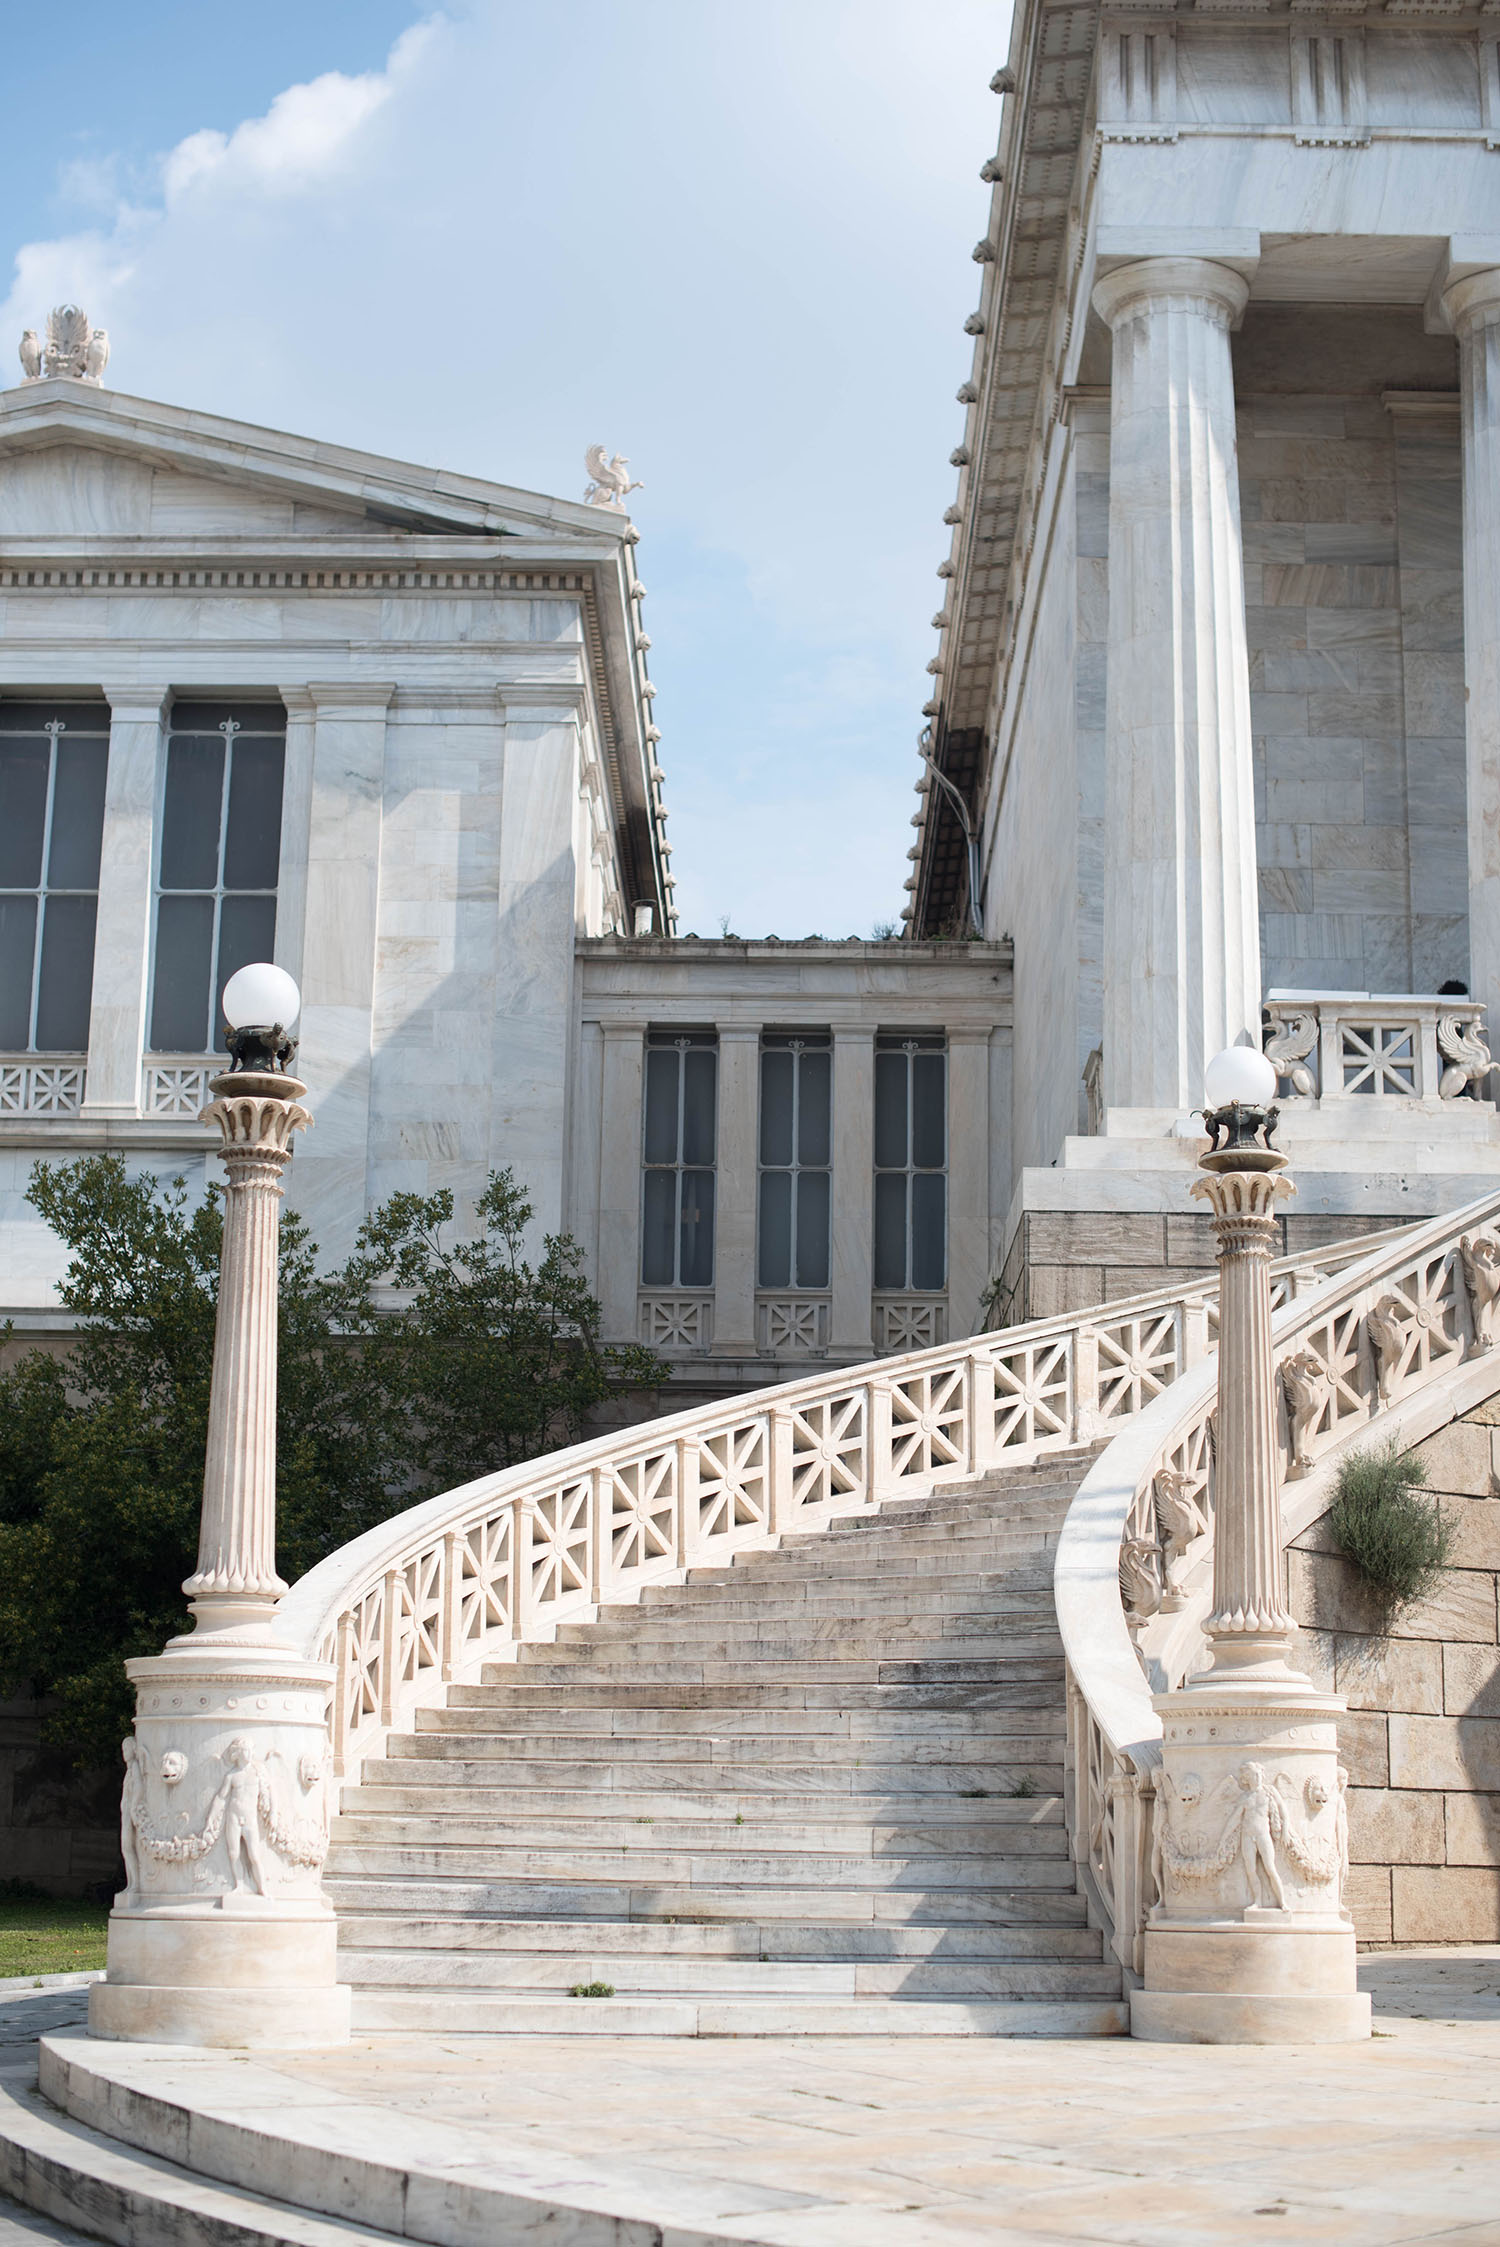 The white marble staircase of the National Library of Athens in Greece, as photographed by travel blogger Cee Fardoe of Coco & Vera